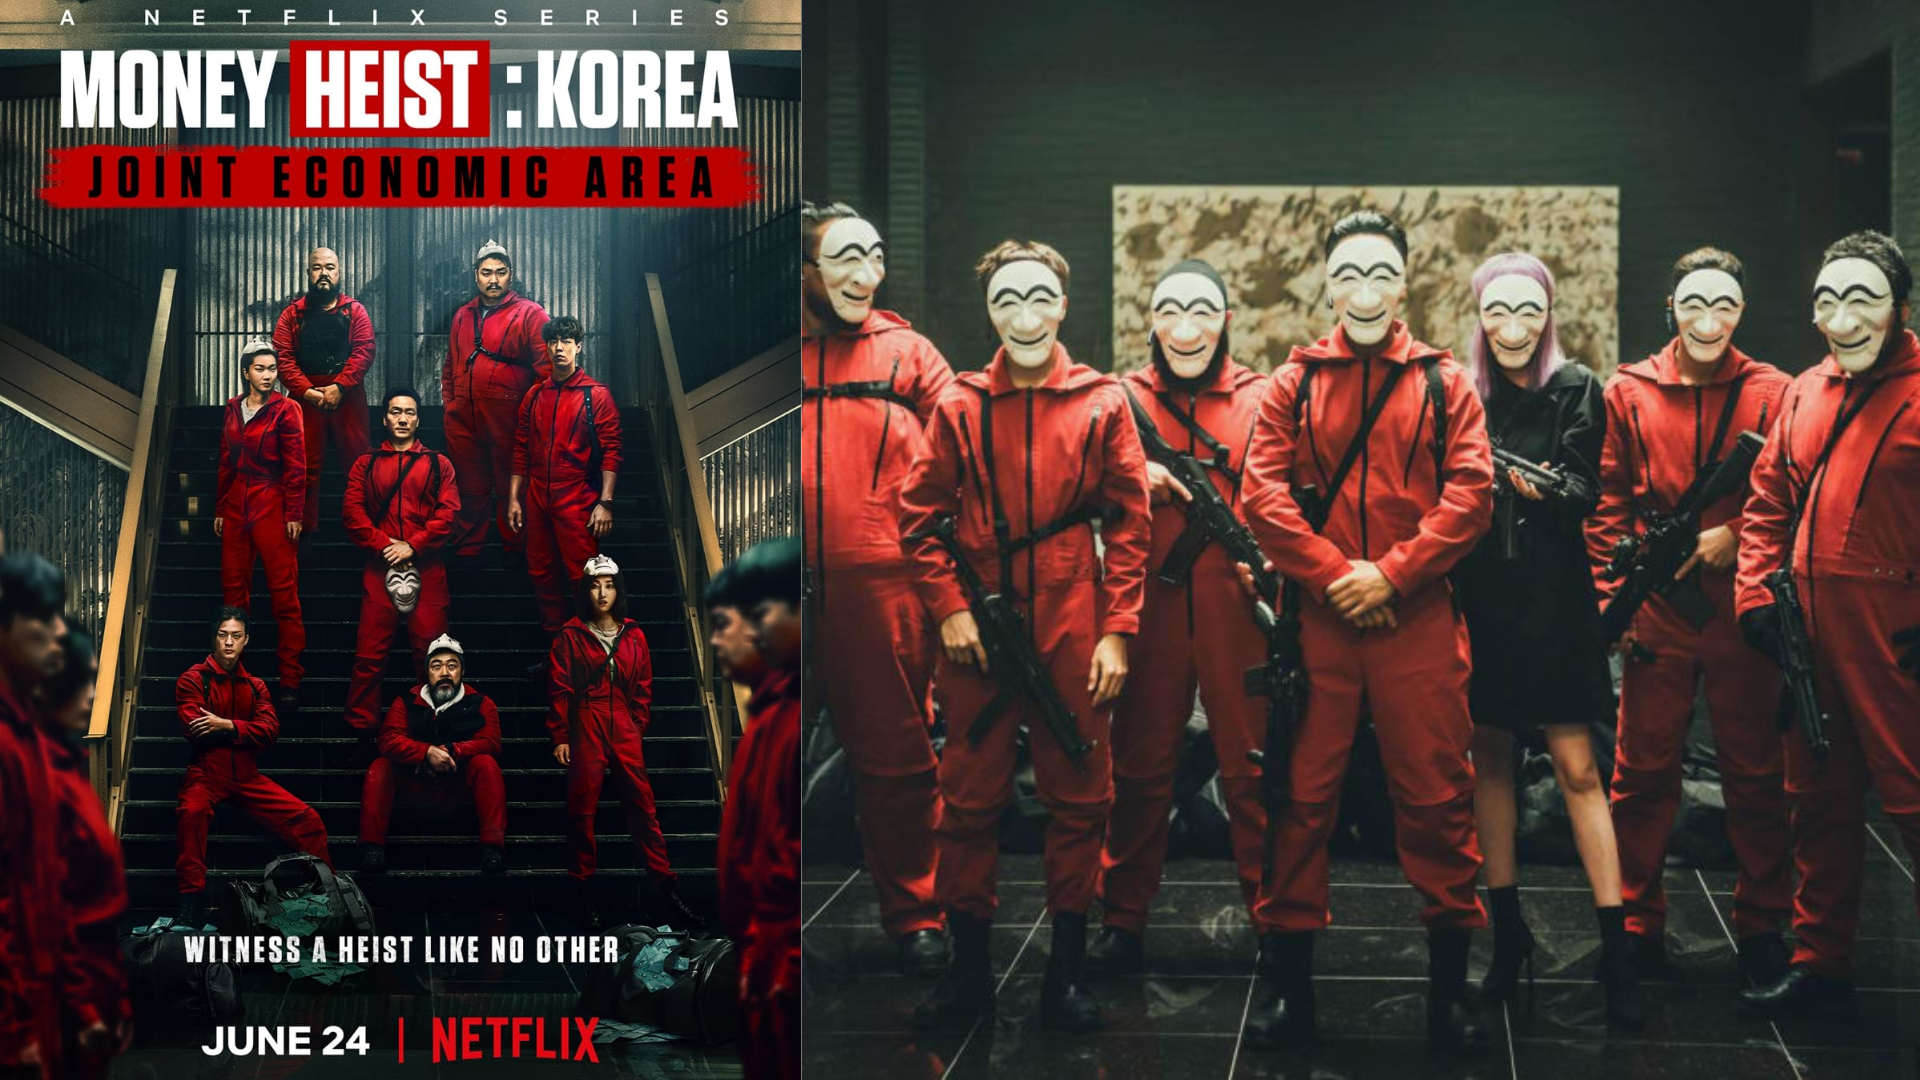 The new Korean adaptation of the successful Spanish crime drama ‘La Casa de Papel’ is officially released on Netflix. 